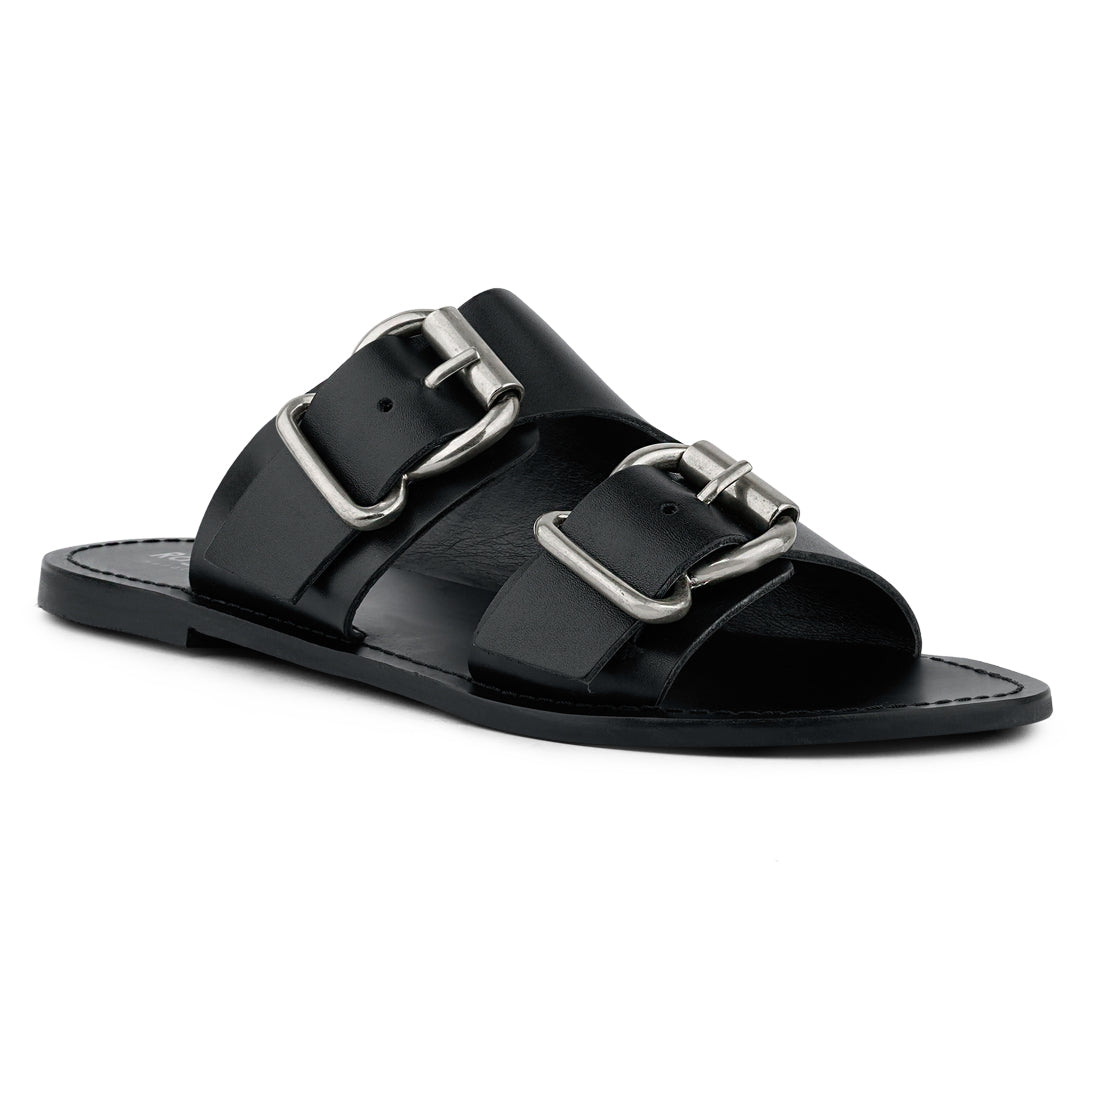 Kelly Flat Sandals With Buckle Straps